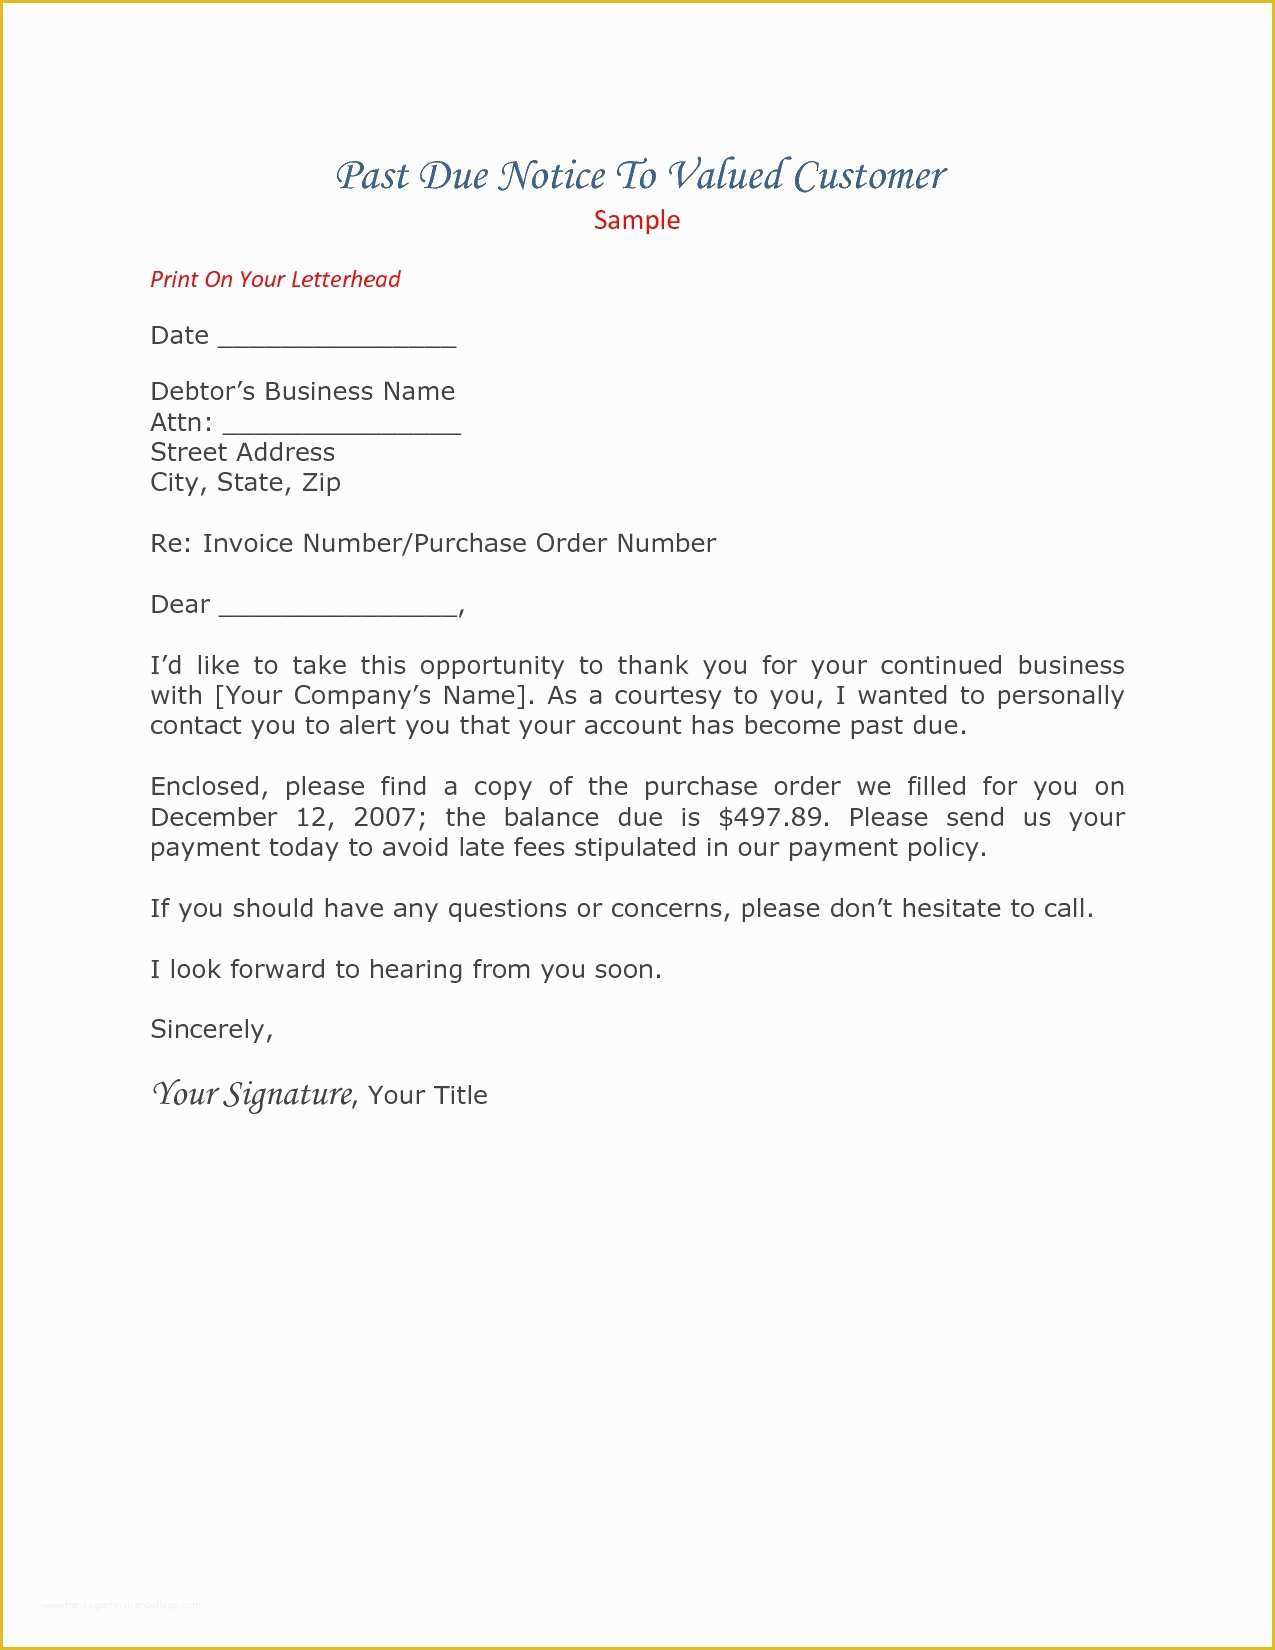 Free Past Due Letter Template Of Past Due Invoice Letter Template